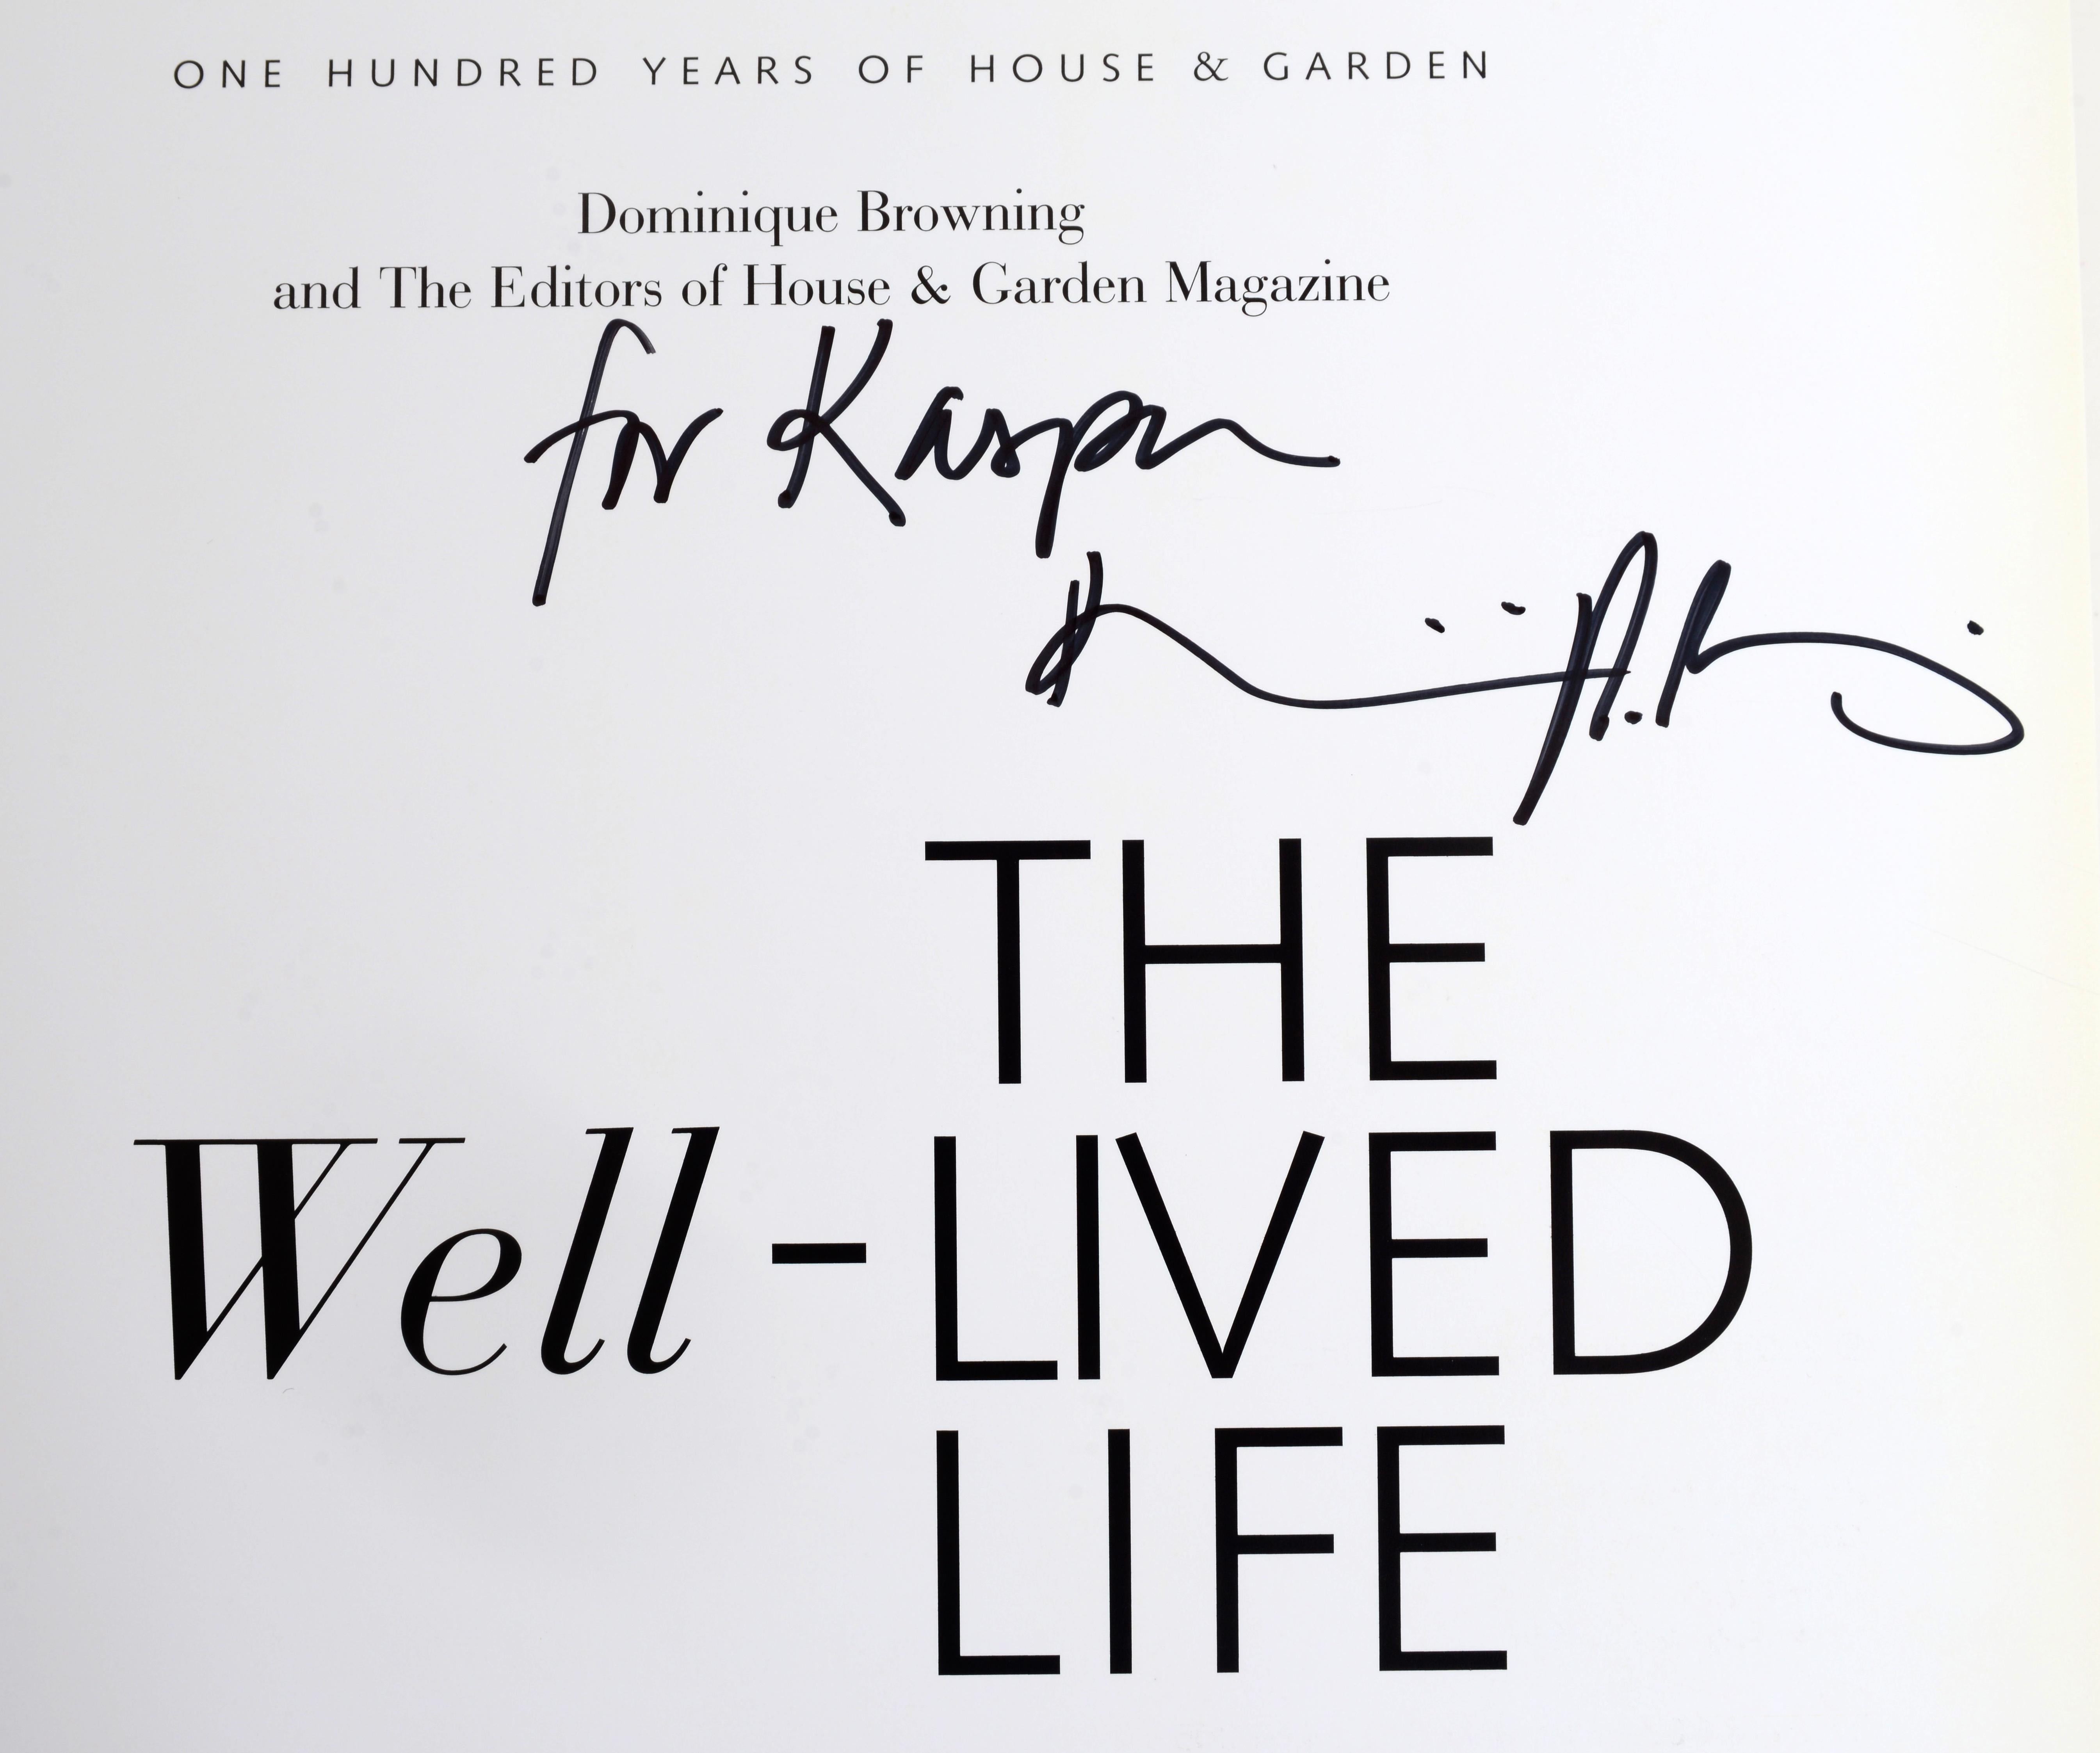 The Well-Lived Life: One Hundred Years Of House & Garden by Dominique Browning. Published by Assouline Publishing, 2003. 1st Ed hardcover with dust jacket signed and inscribed by the author to Herbert Kasper. Herbert Kasper was an American fashion